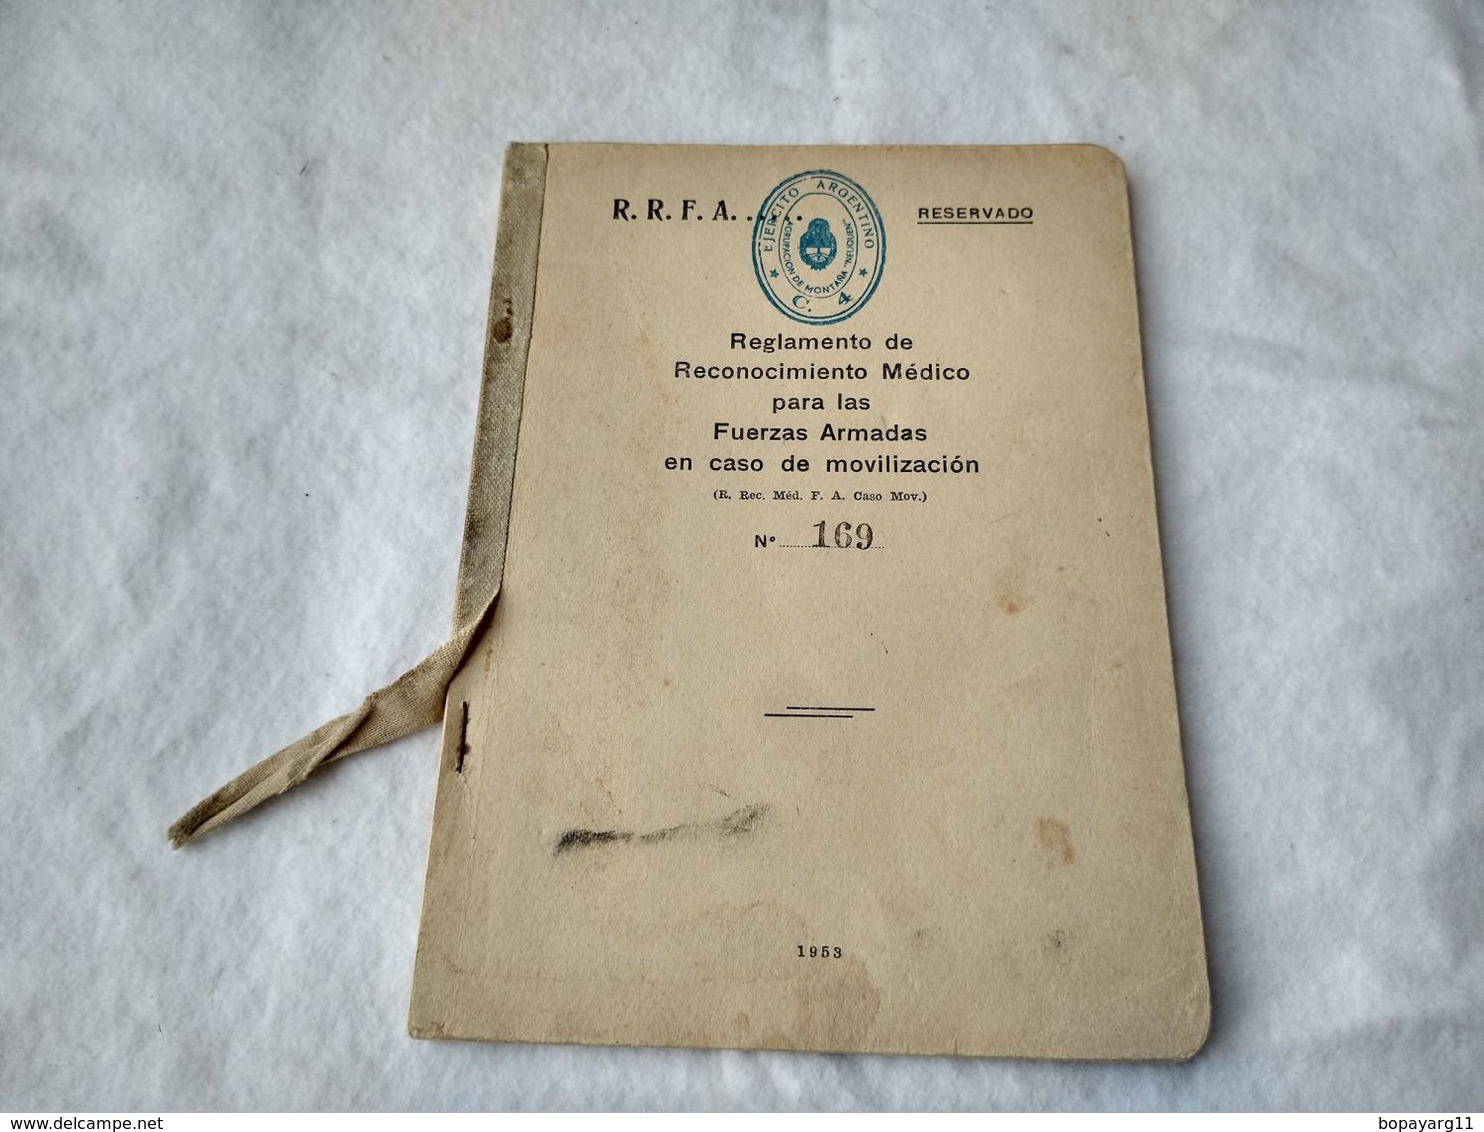 Argentina Argentine Army Classified Medical Selection Procedures 1953 Book #13 - Spaans